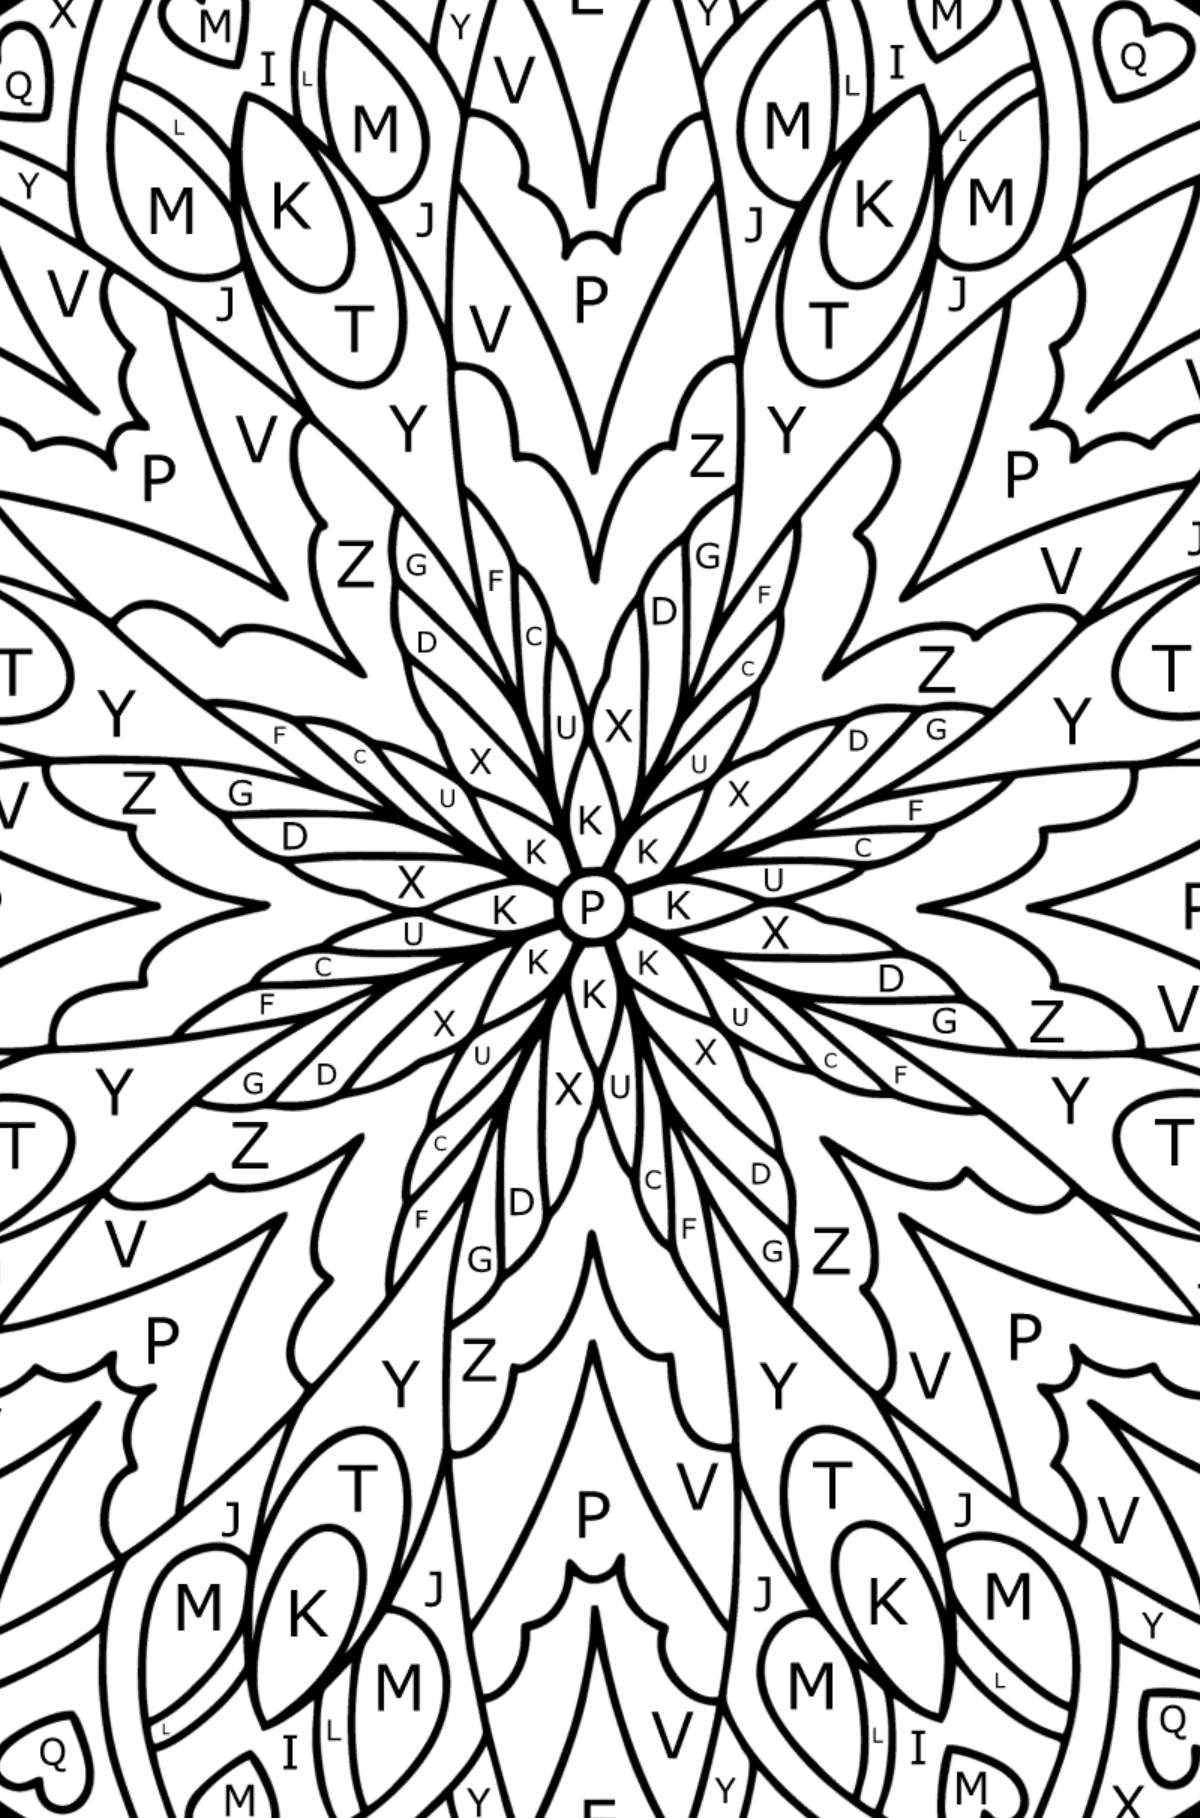 Complex Coloring Page for Kids - Mandala - Coloring by Letters for Kids